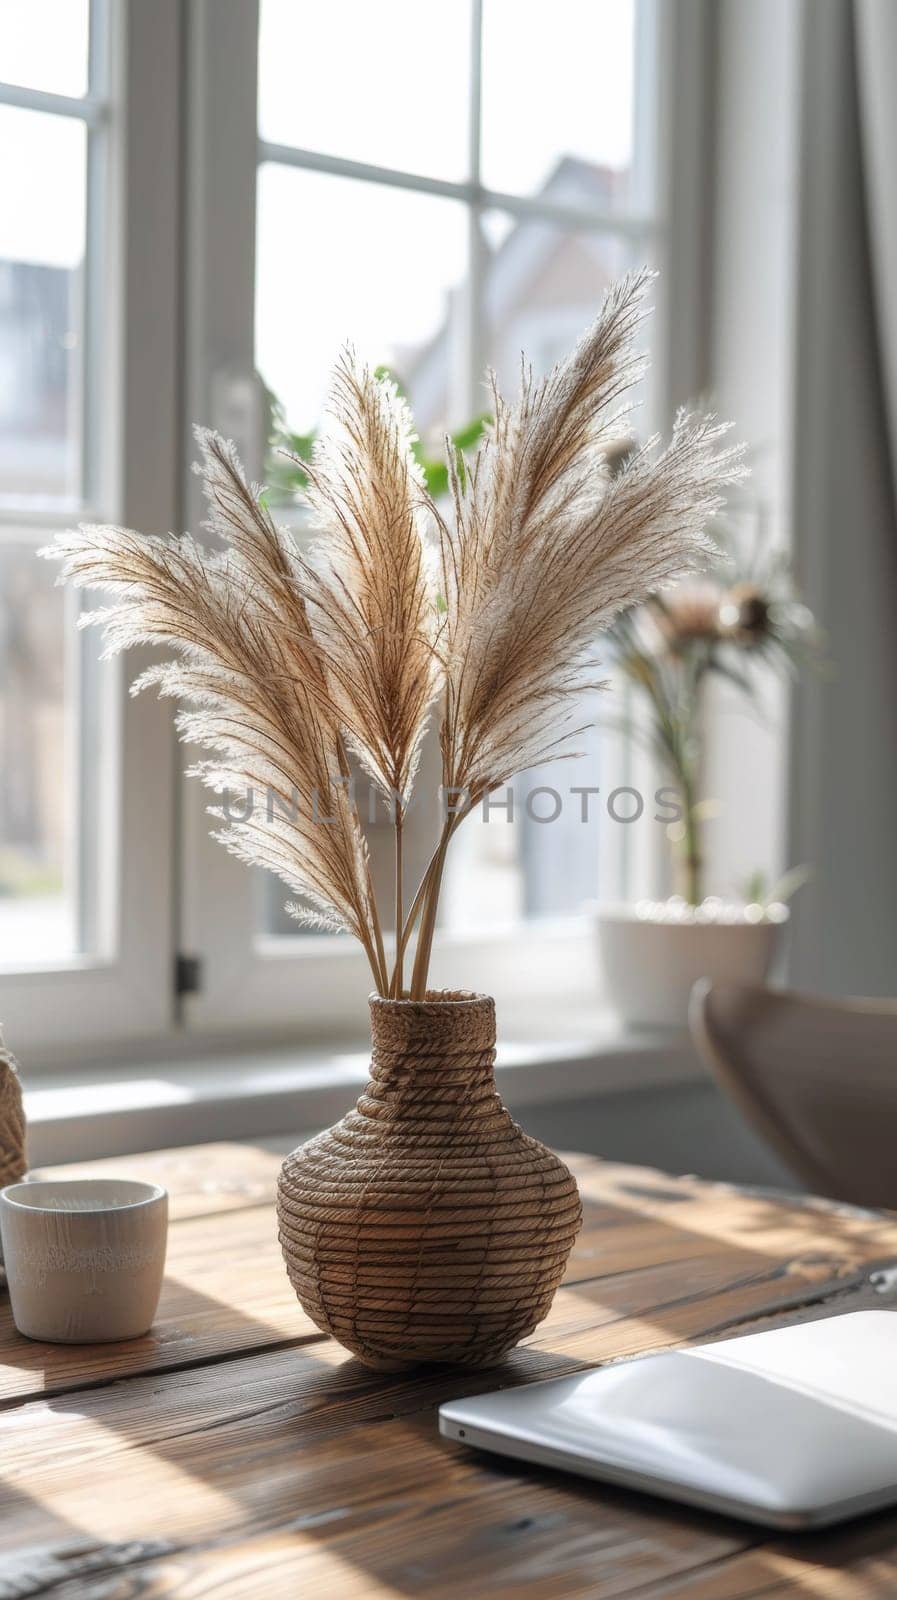 A vase with dried grass on a table next to an ipad